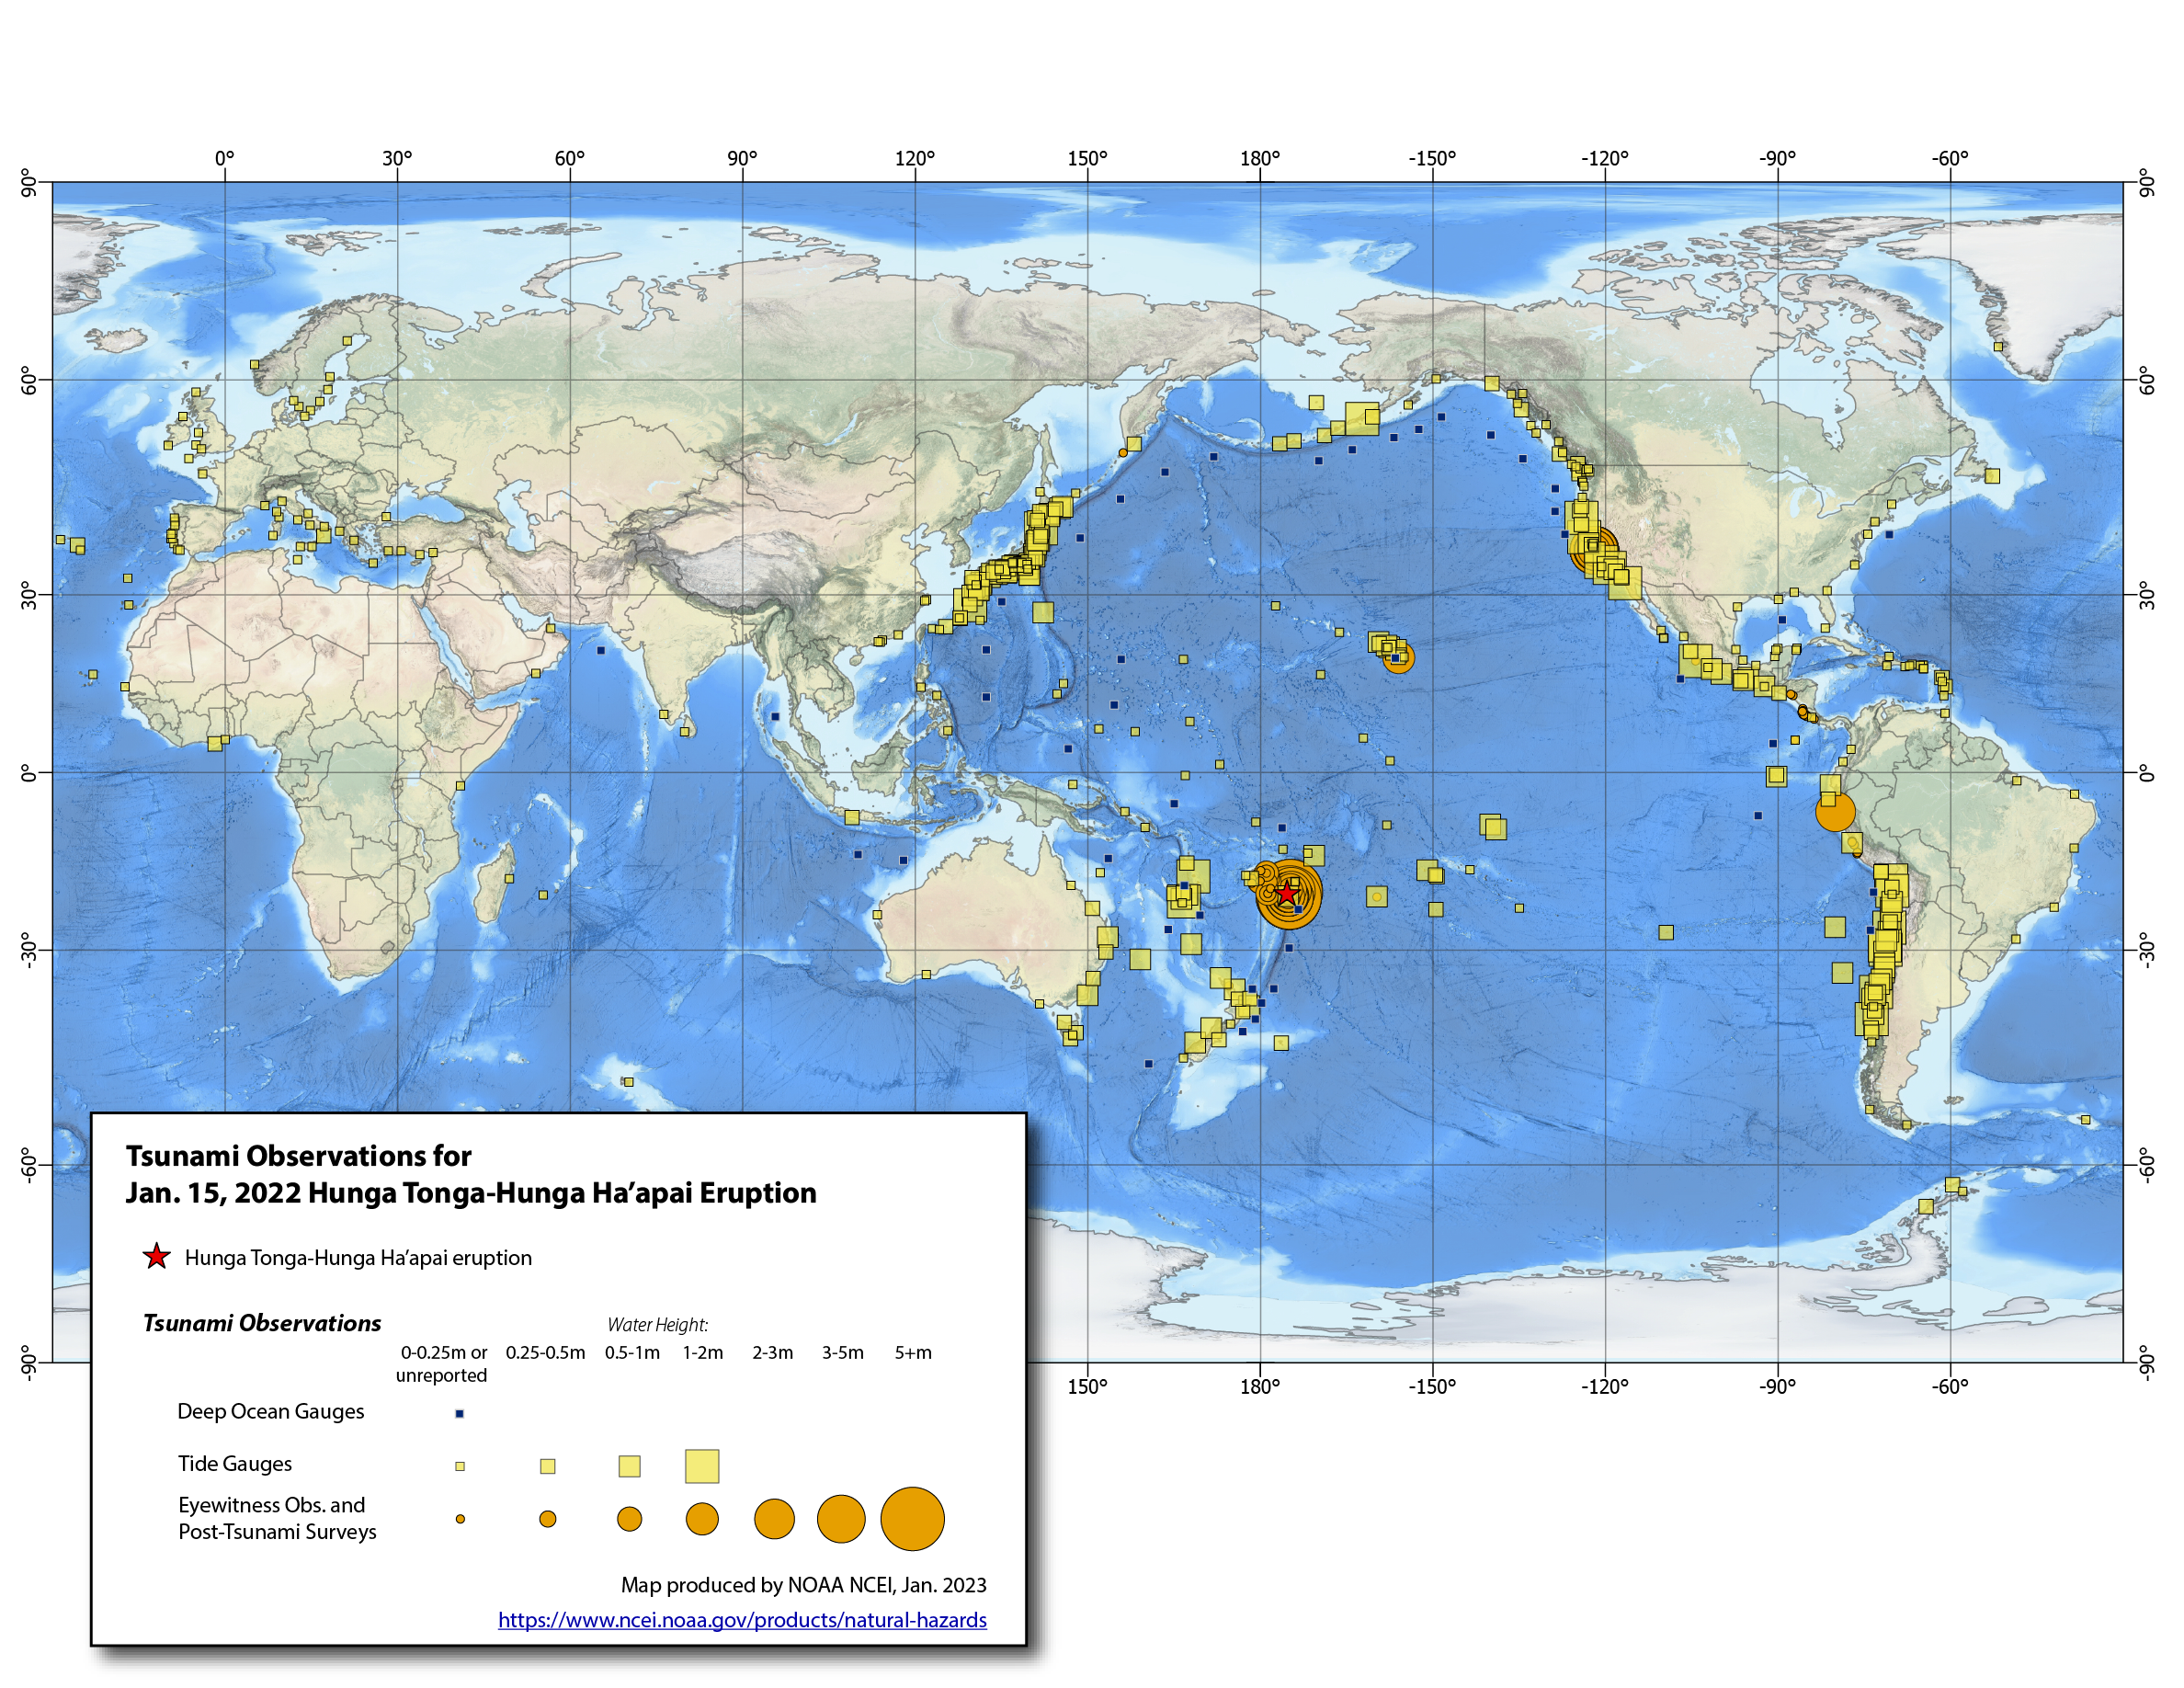 Global map of Tsunami Observations in Tonga for January 15, 2022 Hunga Tonga-Hunga Ha'apai Eruption with tide gauge and eyewitness observations marked.